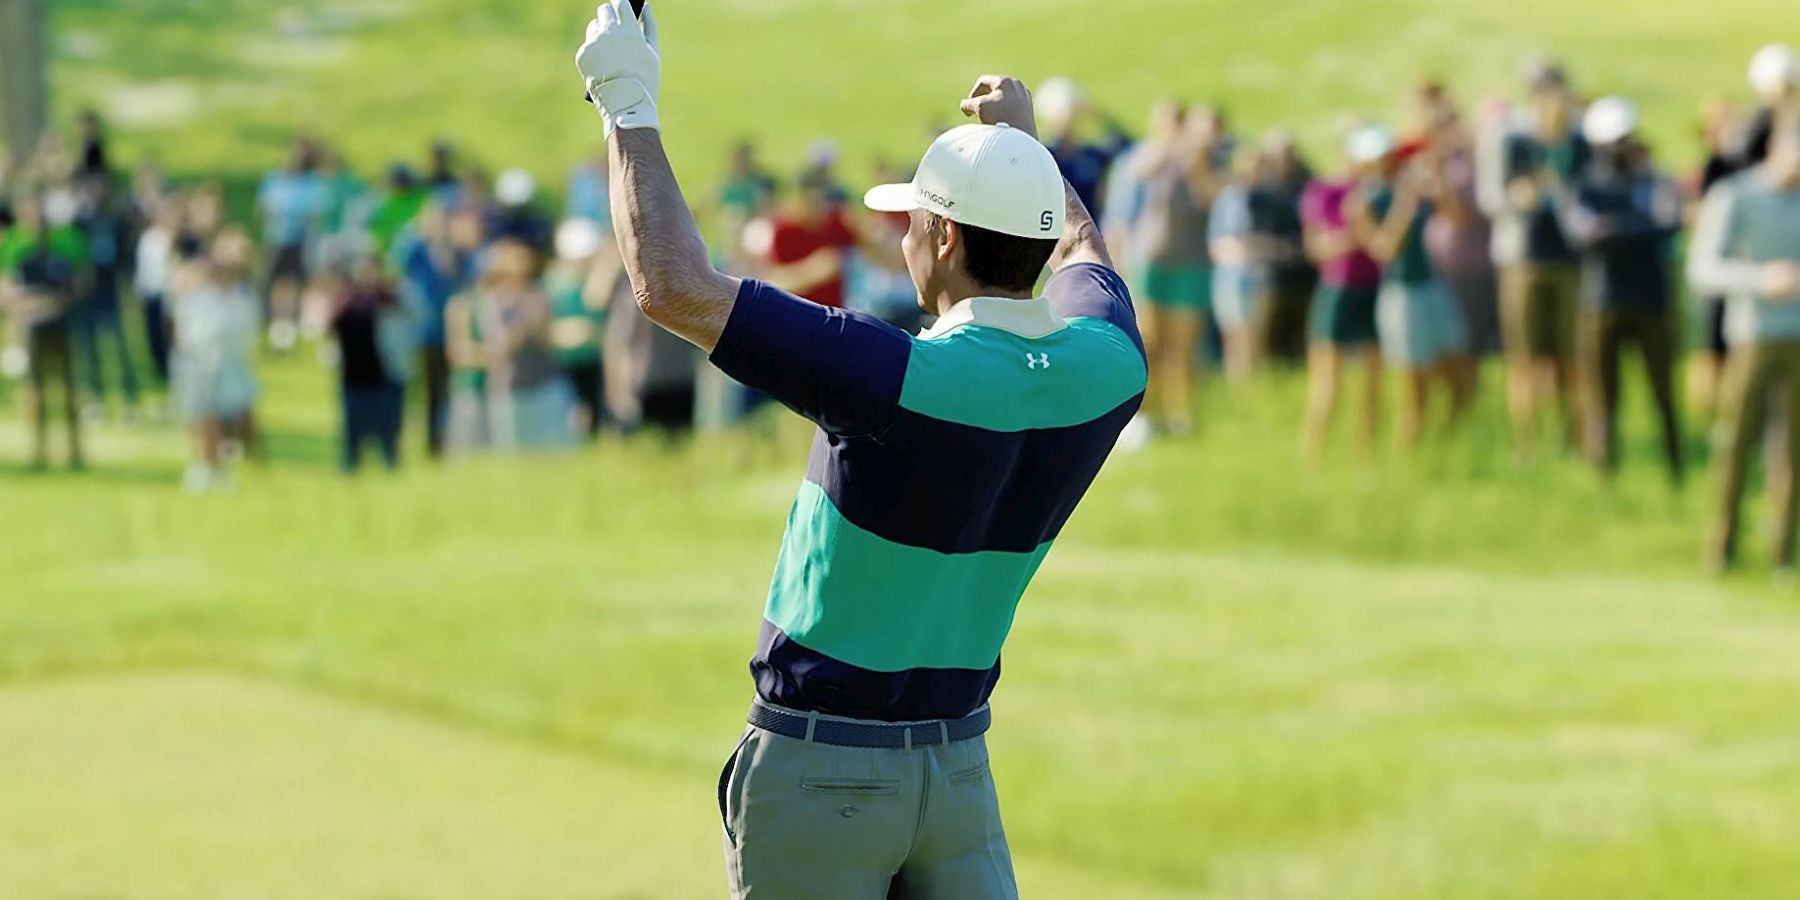 A golfer in EA Sports PGA Tour with their back turned to the camera and their arms up in celebration.